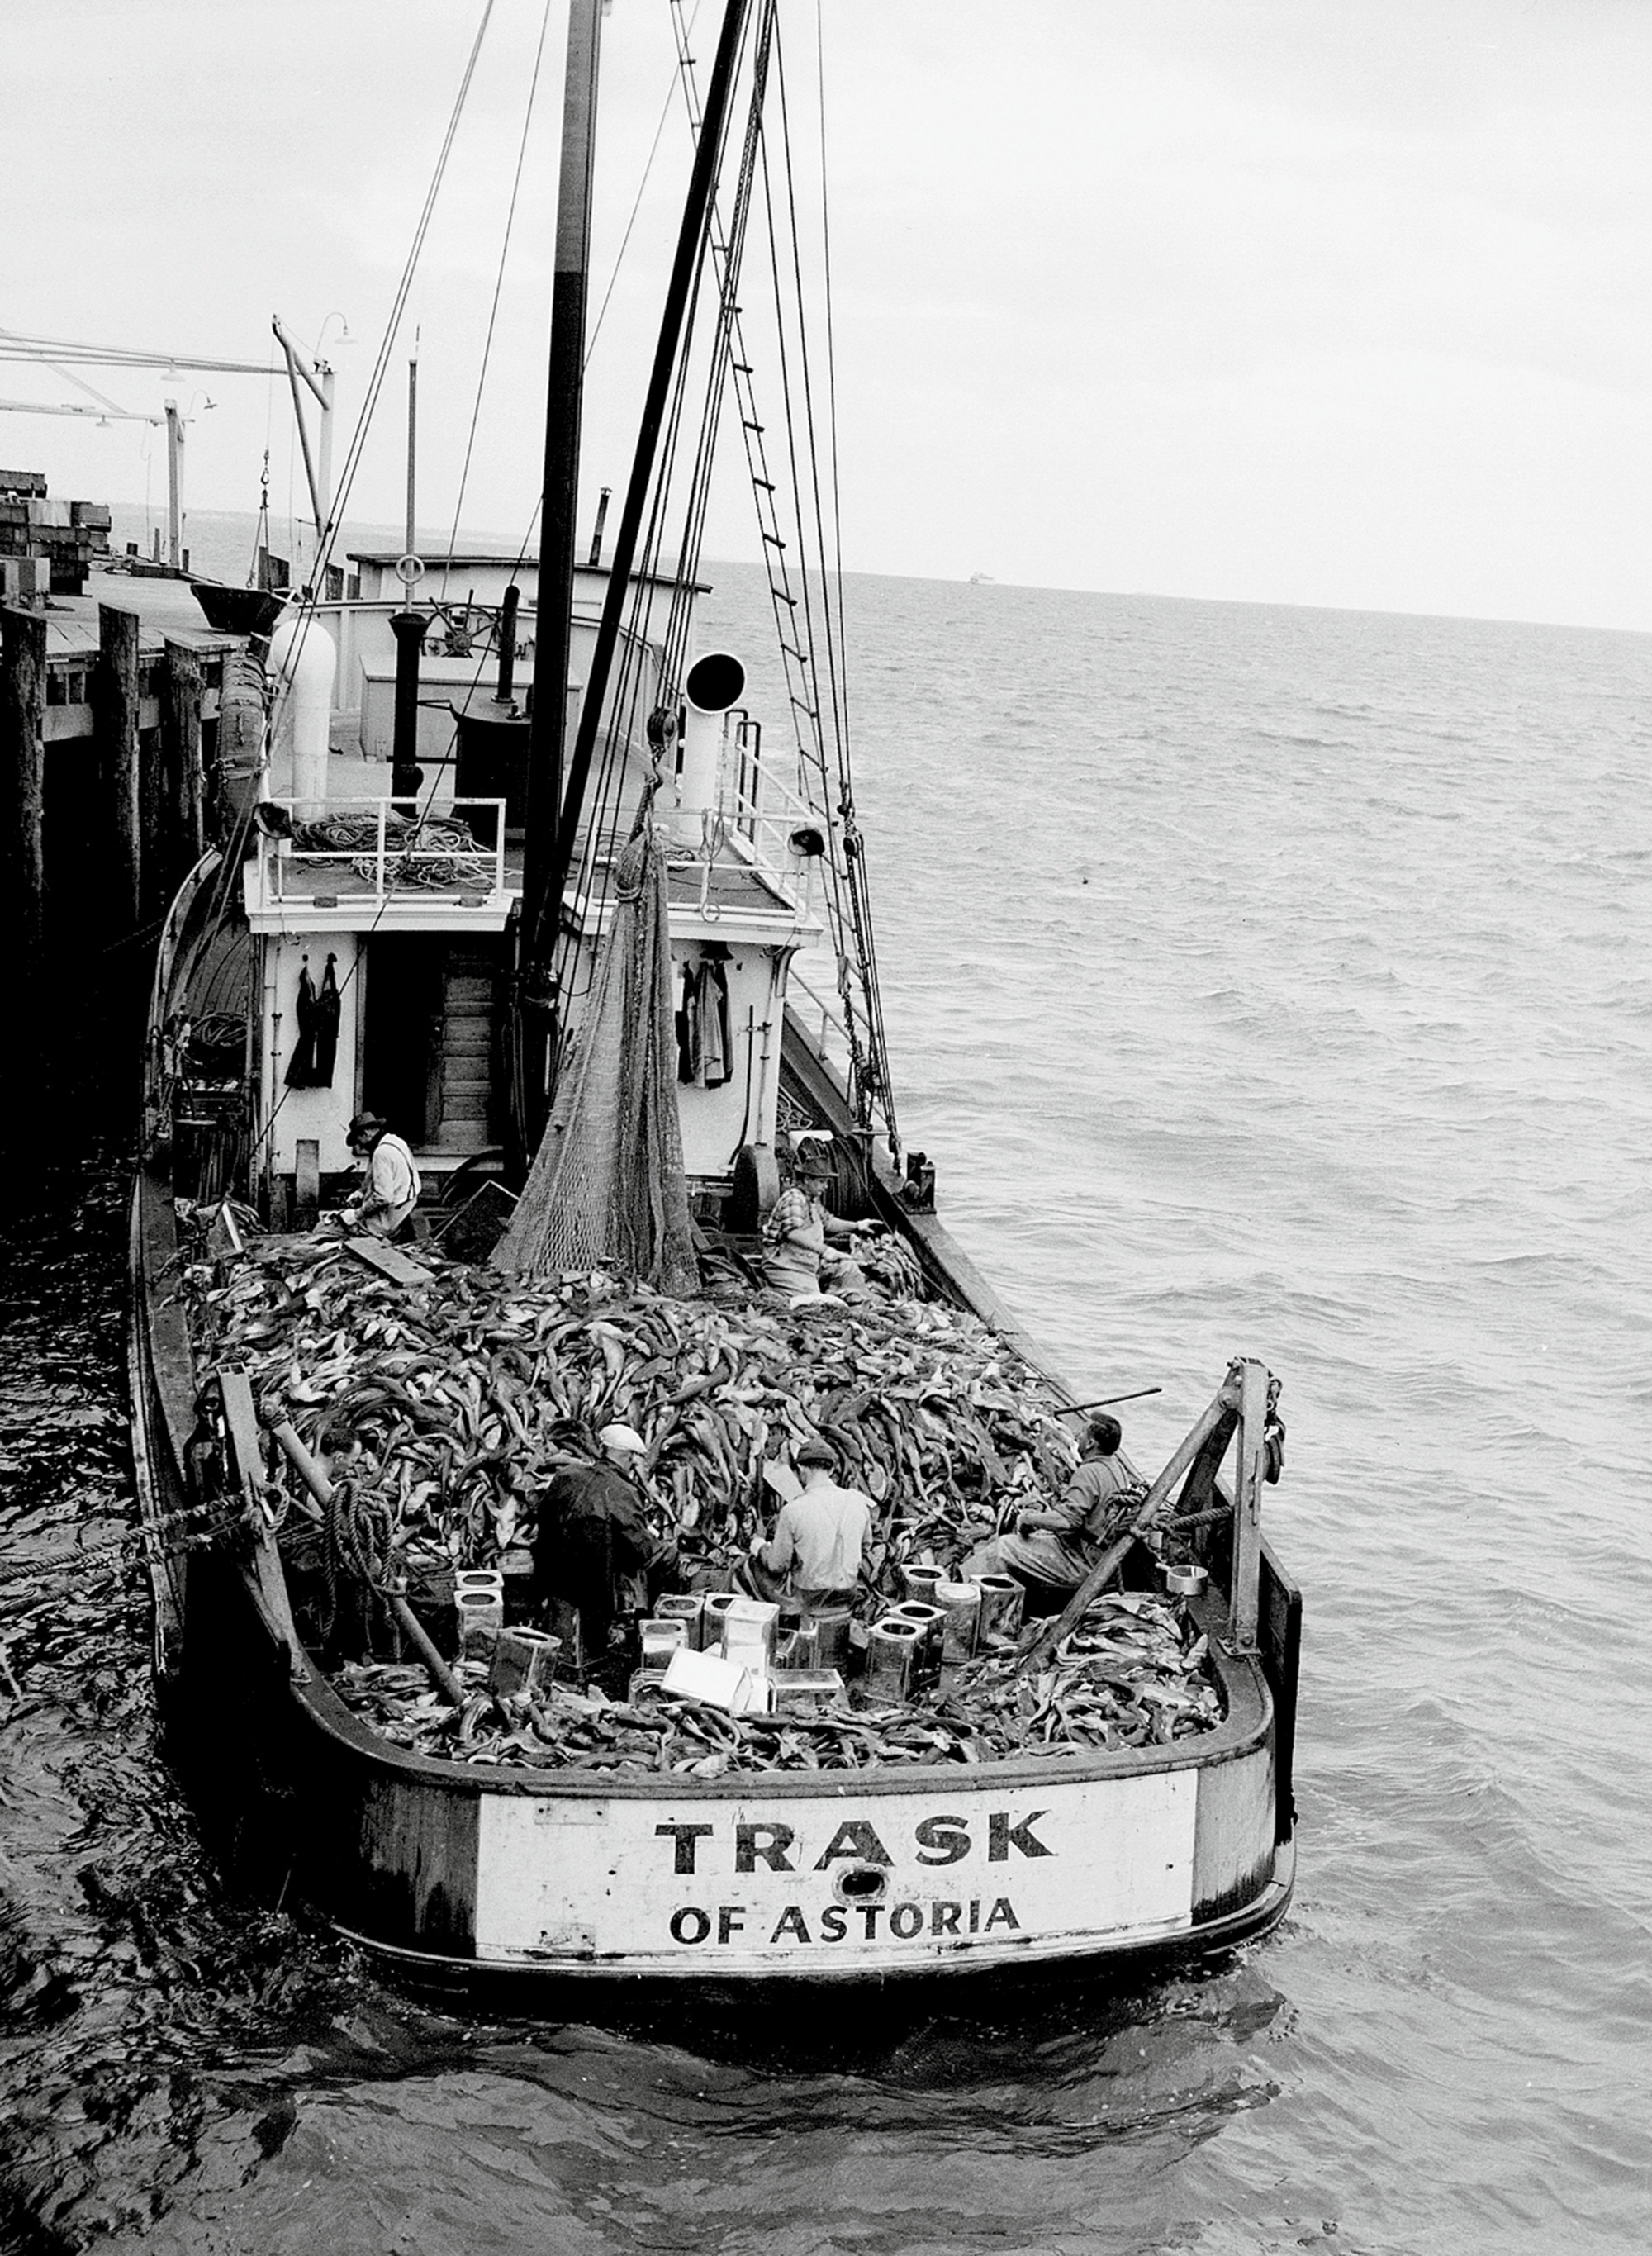 George Moskovita and his crew with a haul of soupfin sharks aboard the Trask of Astoria, Astoria, Oregon, 1948. Courtesy Columbia River Maritime Museum.